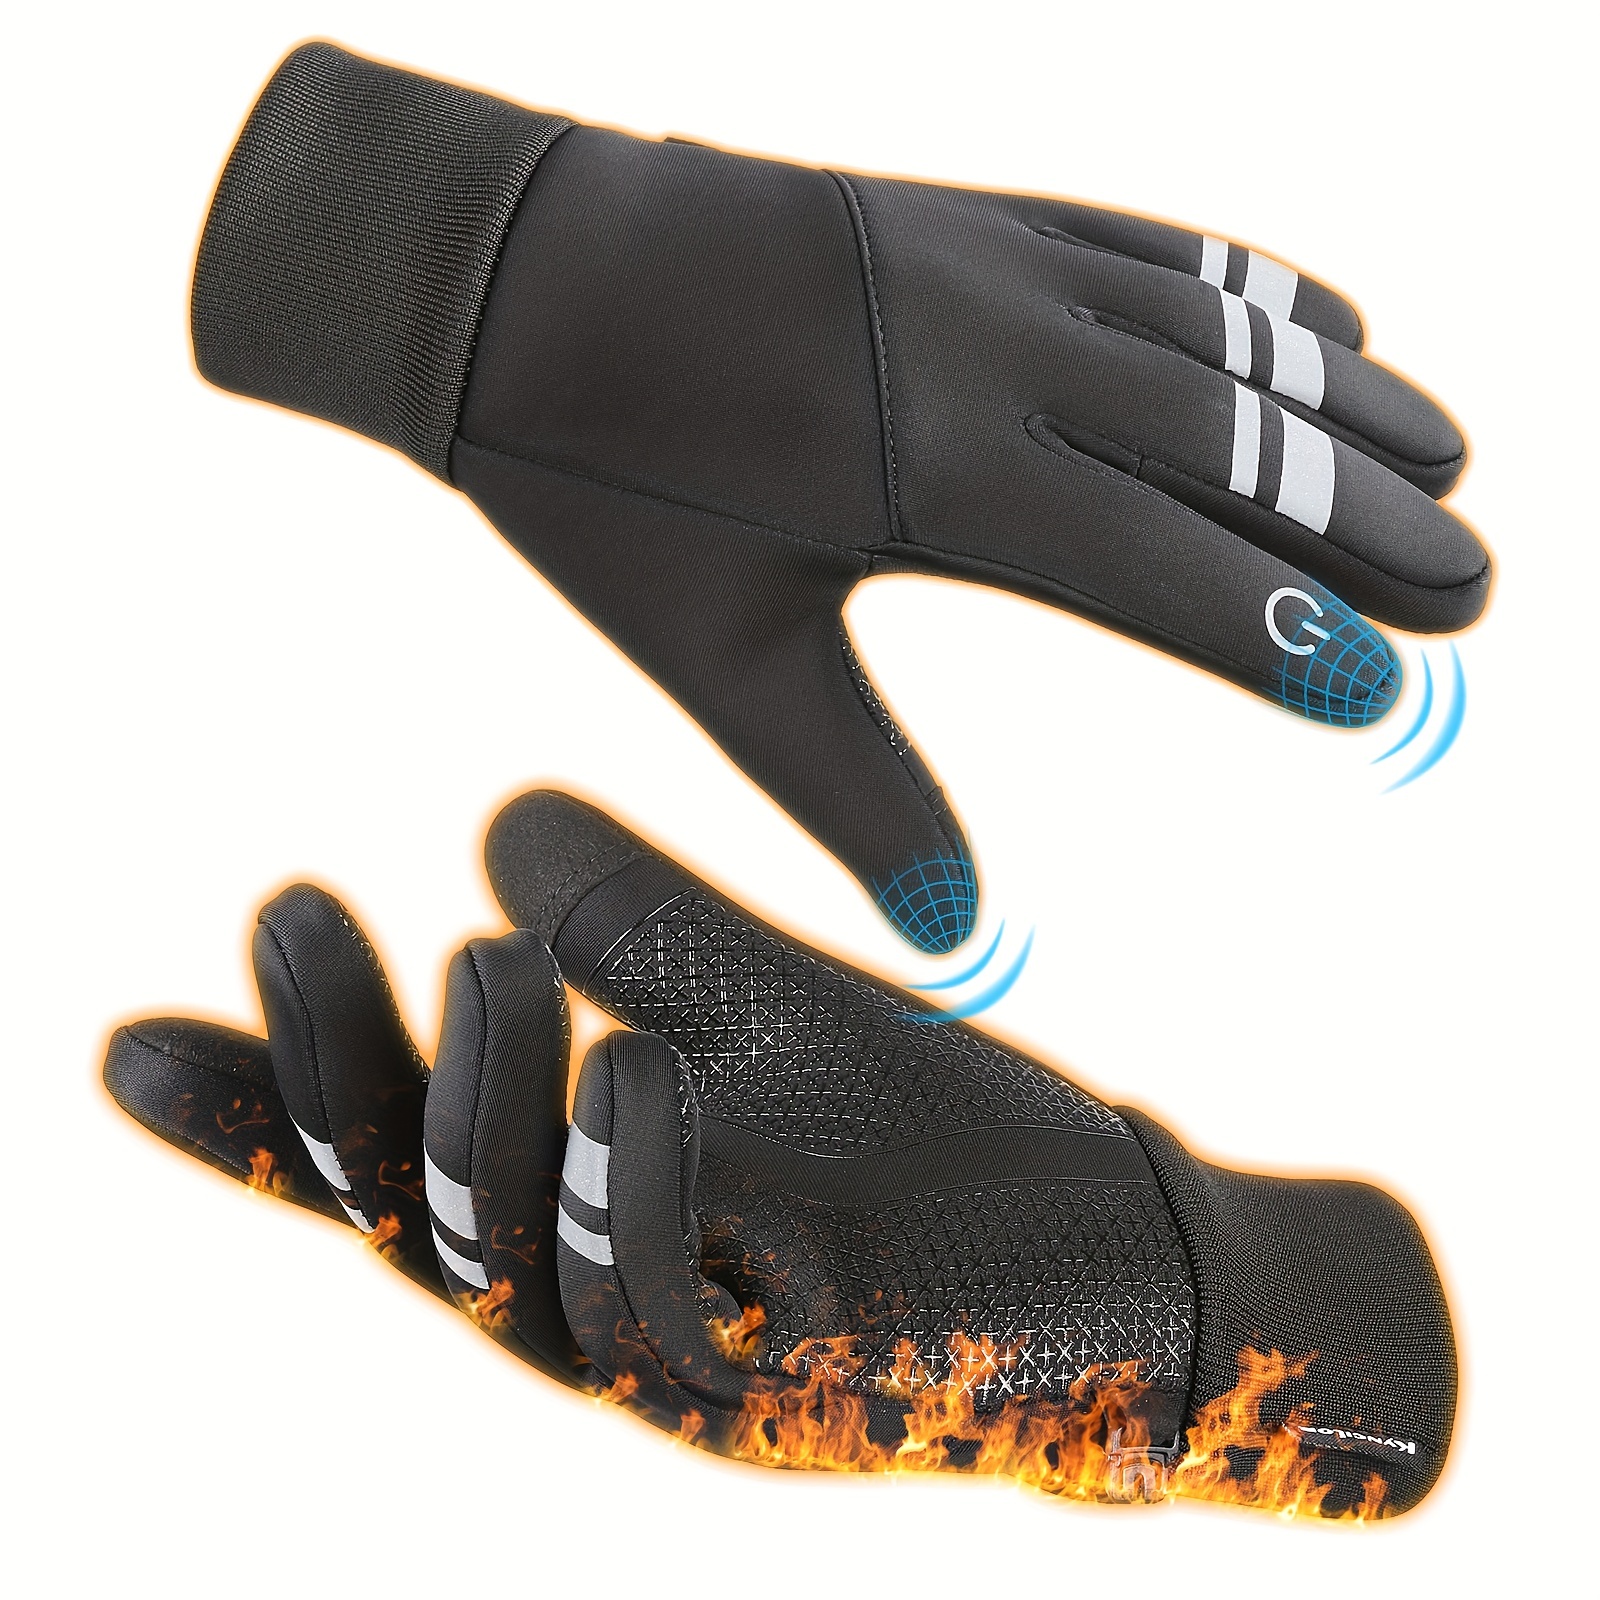 

Professional Winter Warm Touch Screen Thickened Windproof Gloves, For Outdoor Skiing, Cycling